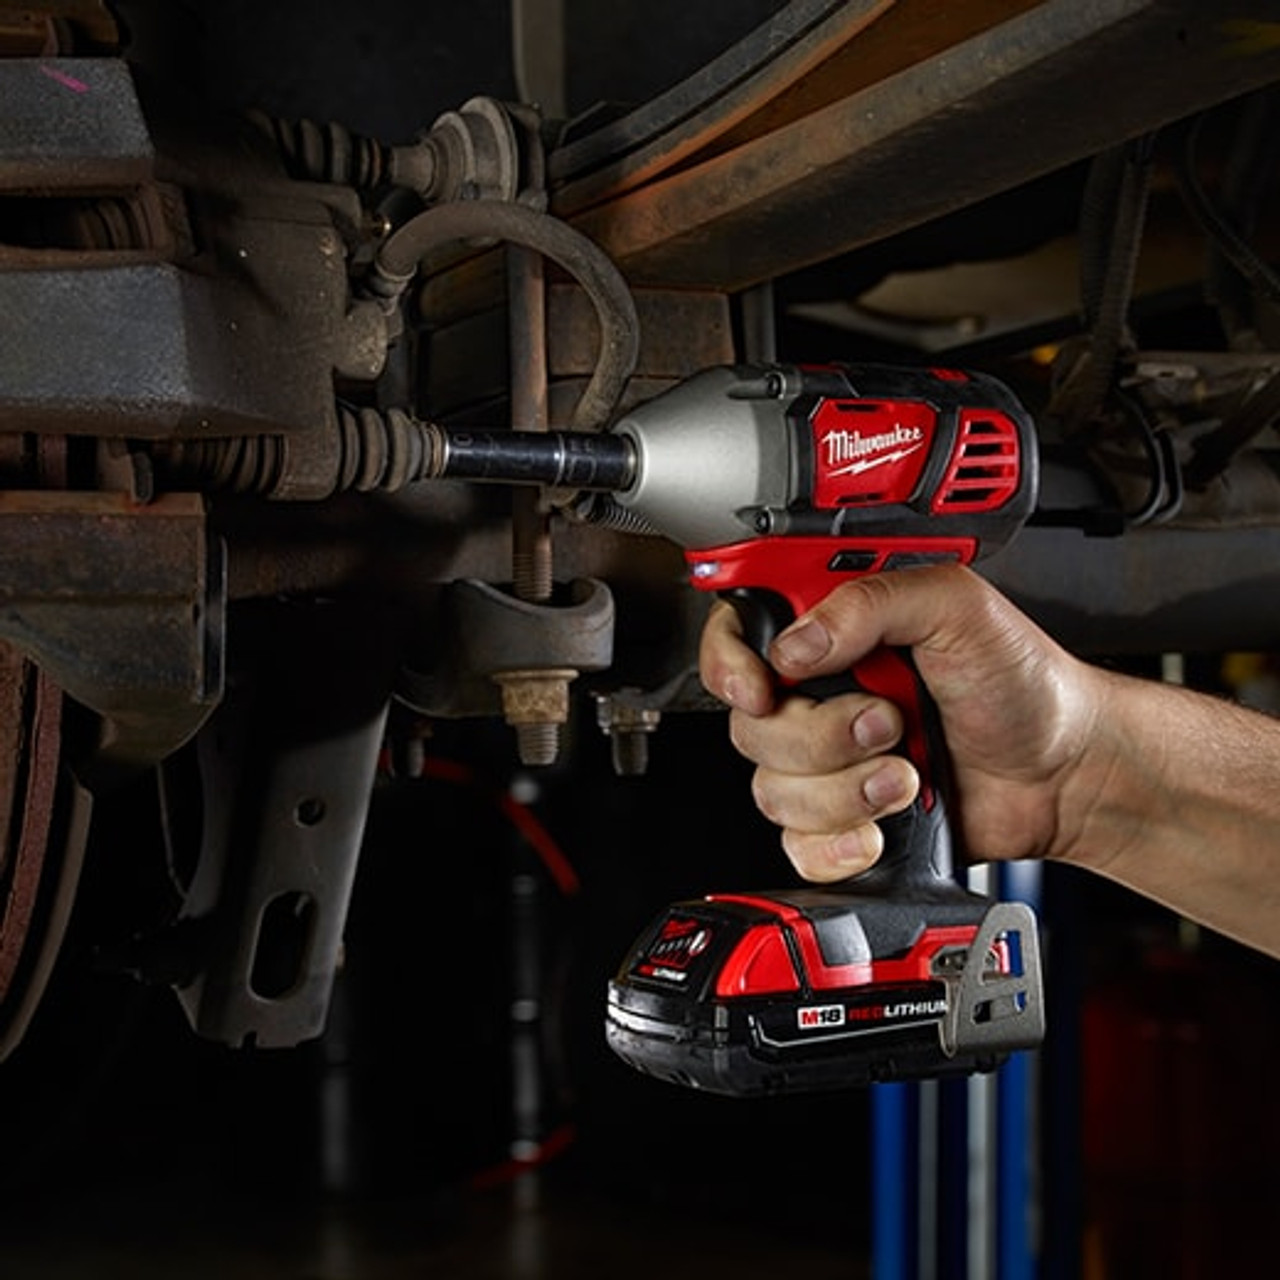 M18 3/8" Impact Wrench with Friction Ring